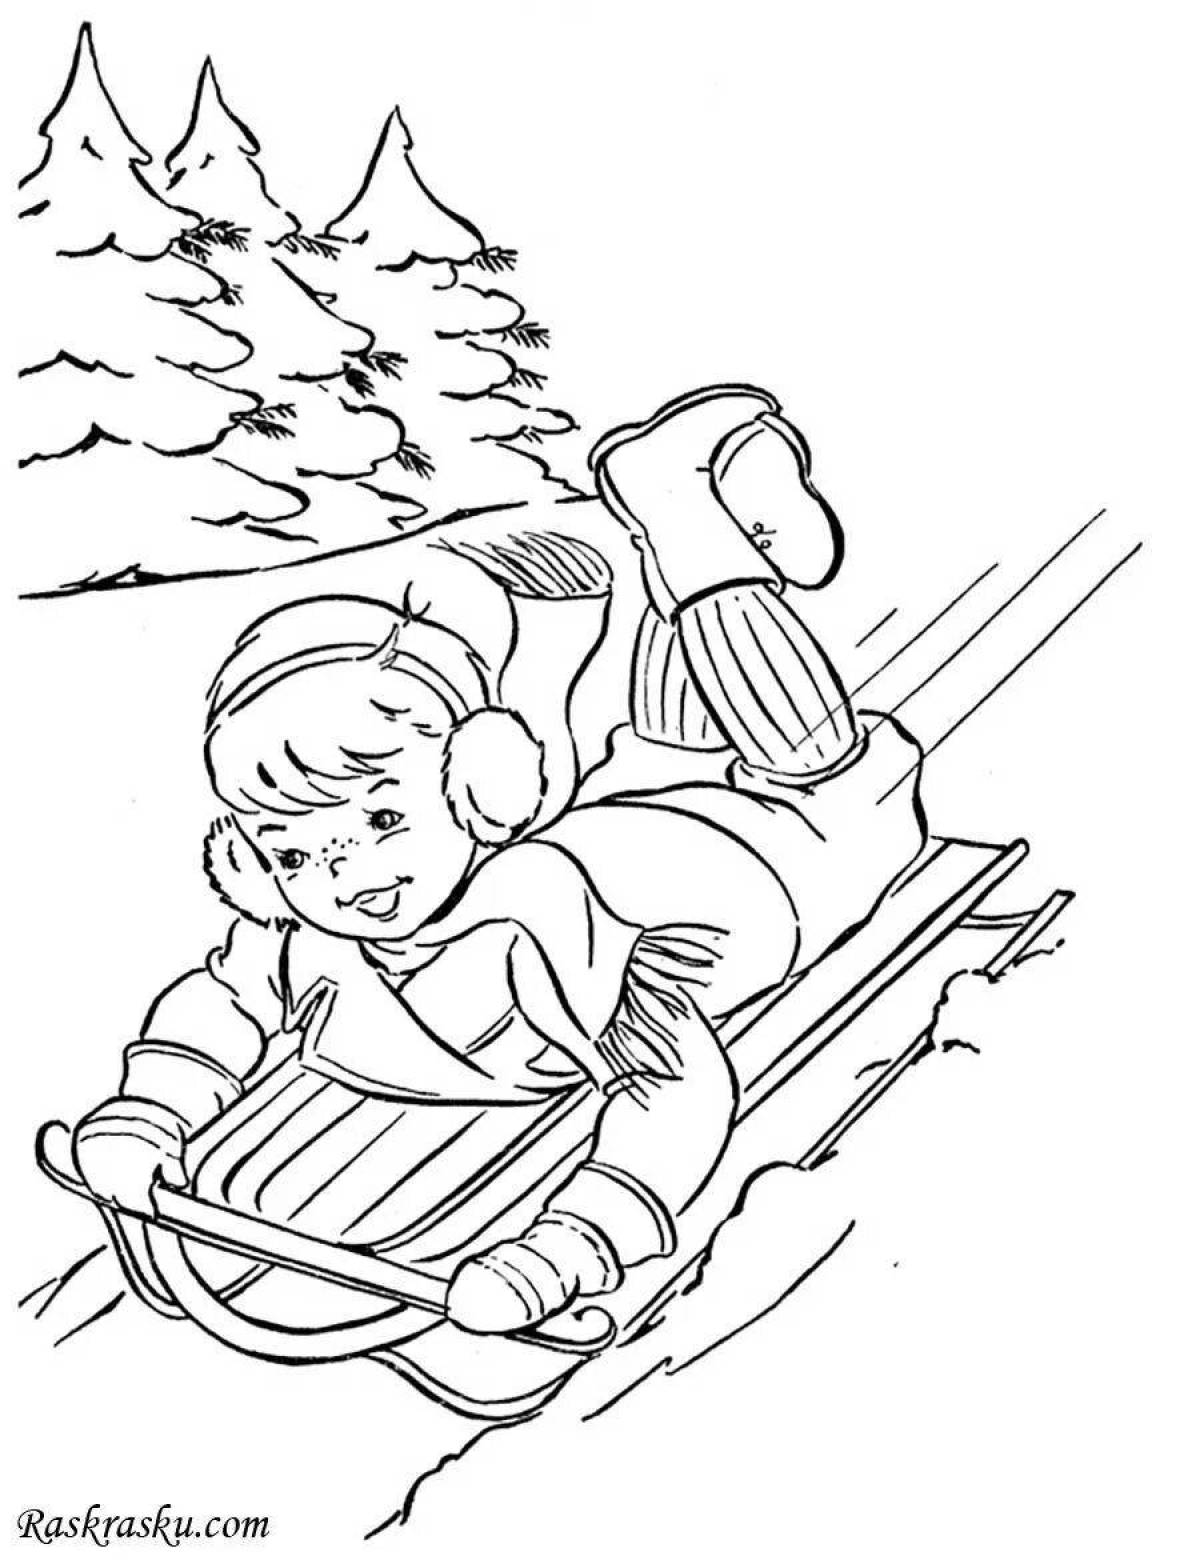 Awesome snow slide coloring page